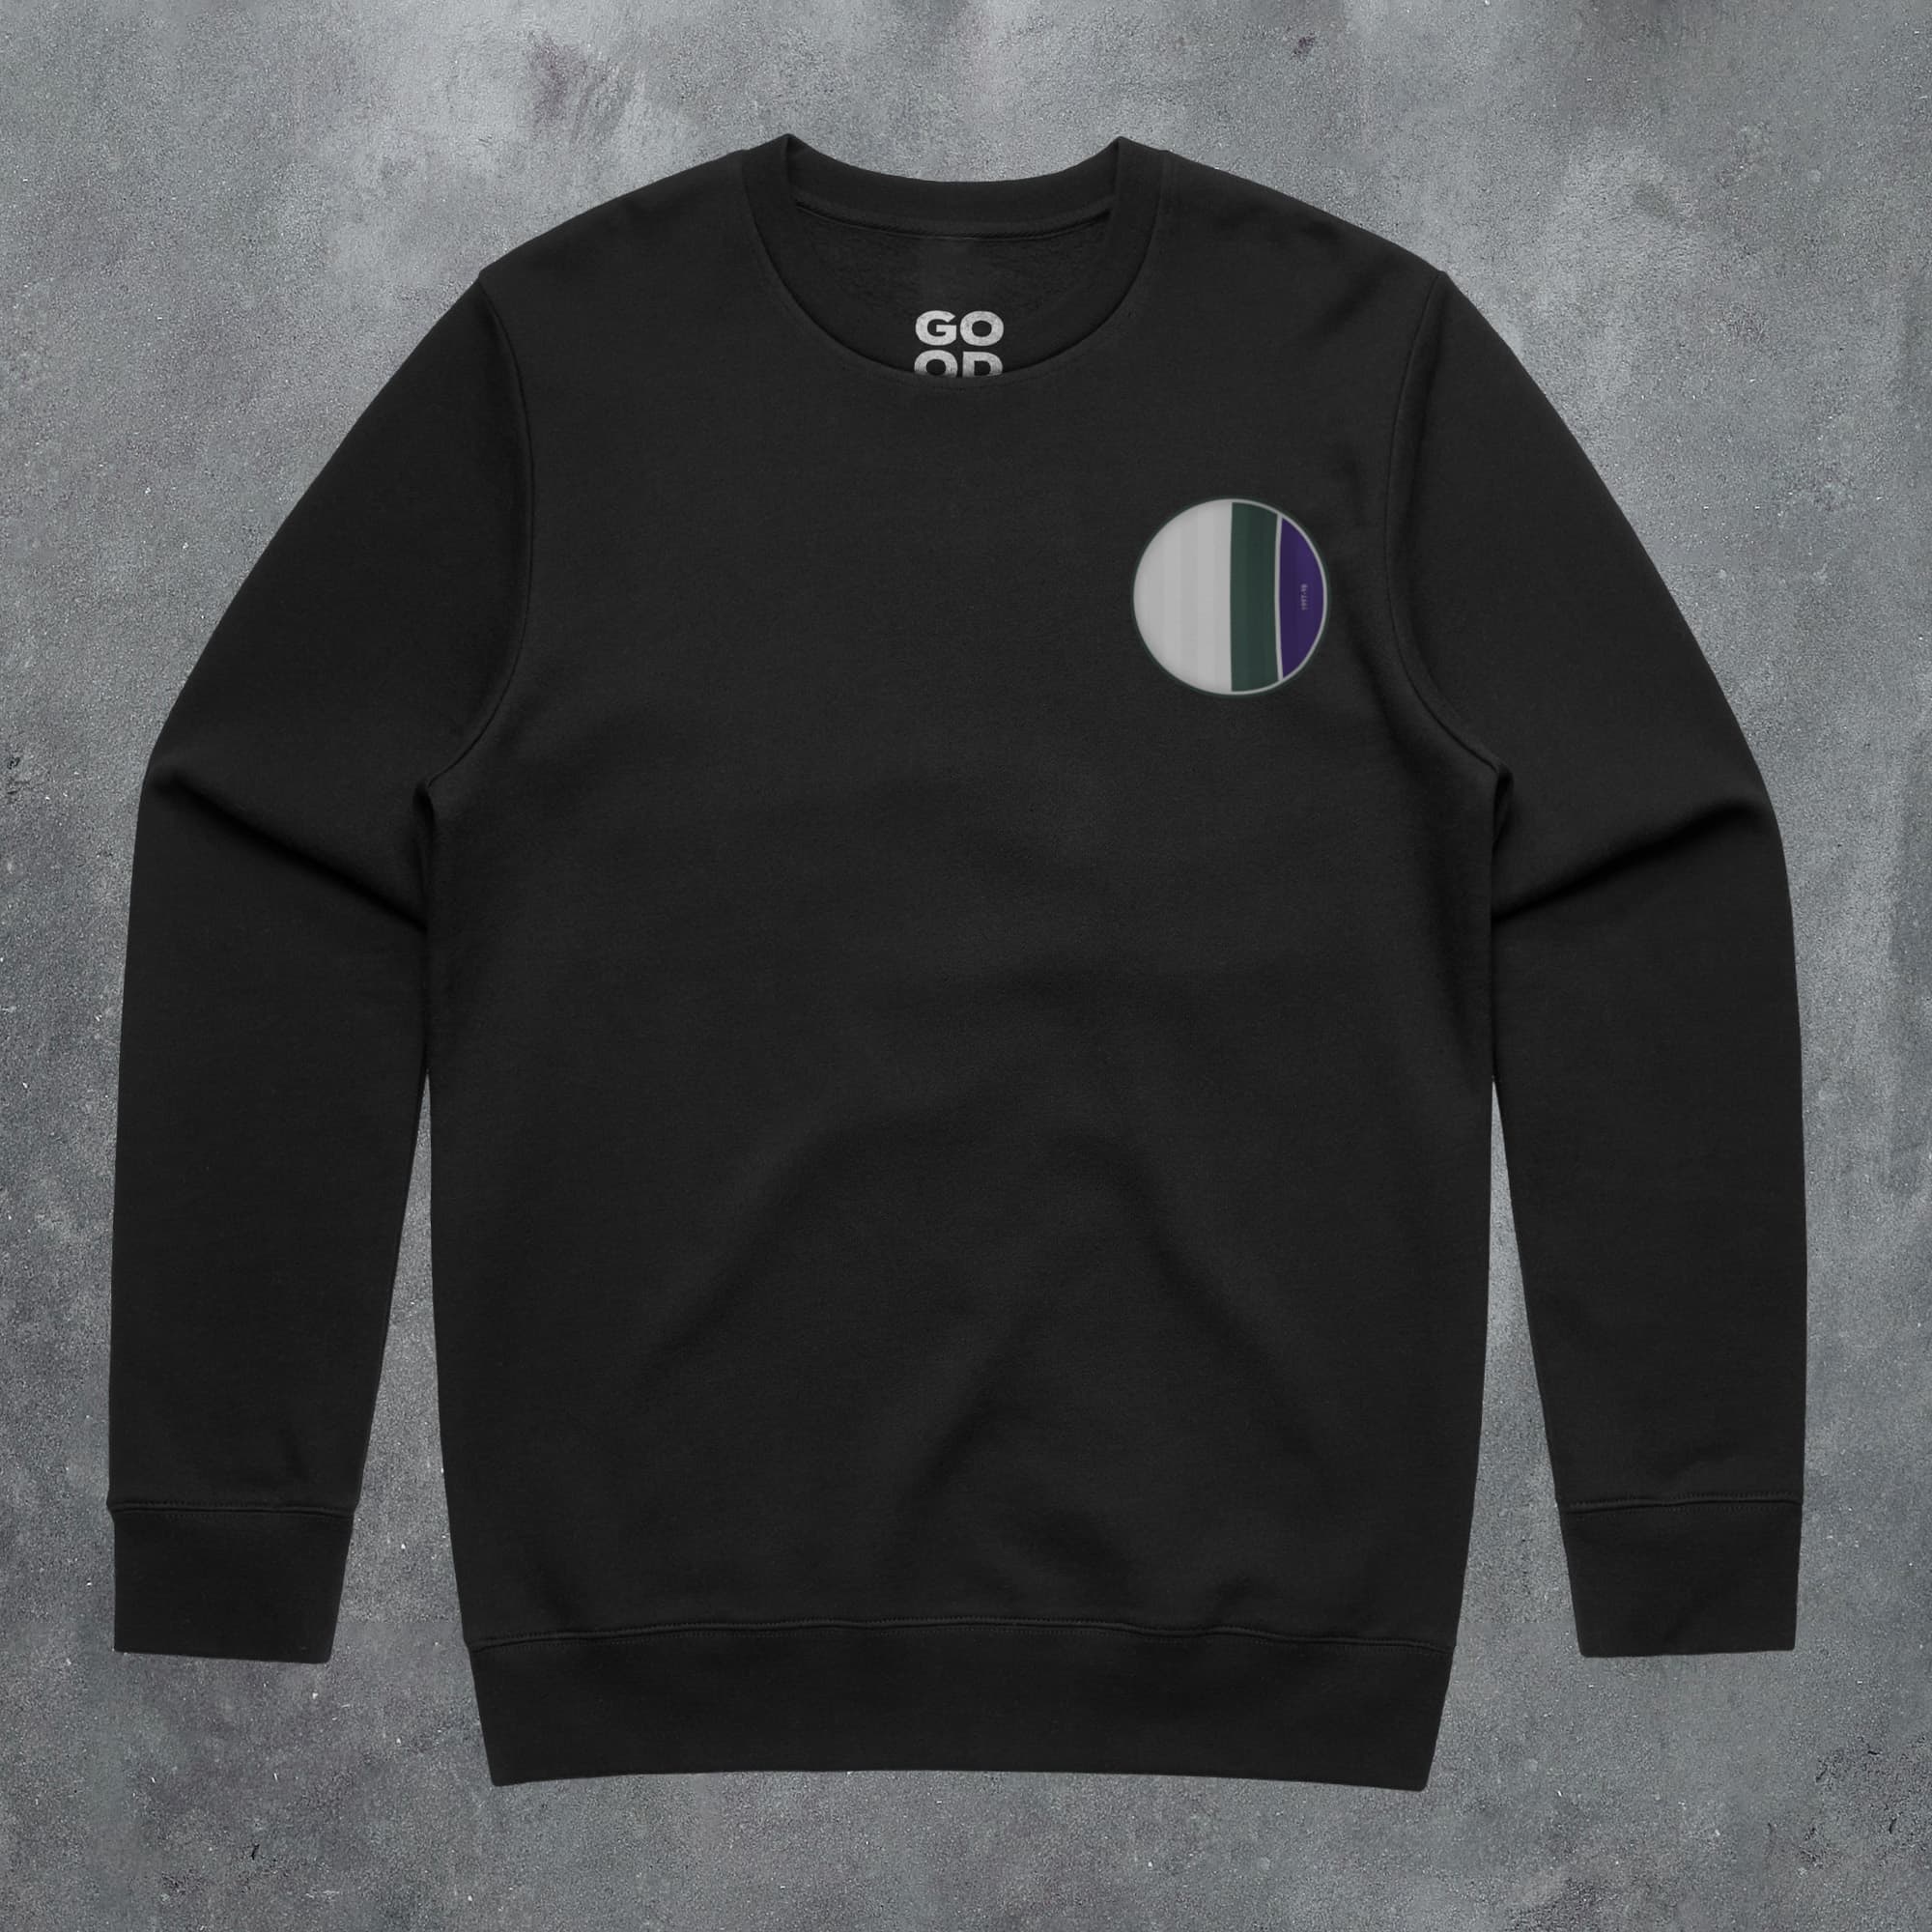 a black sweatshirt with a green, white and blue circle on it